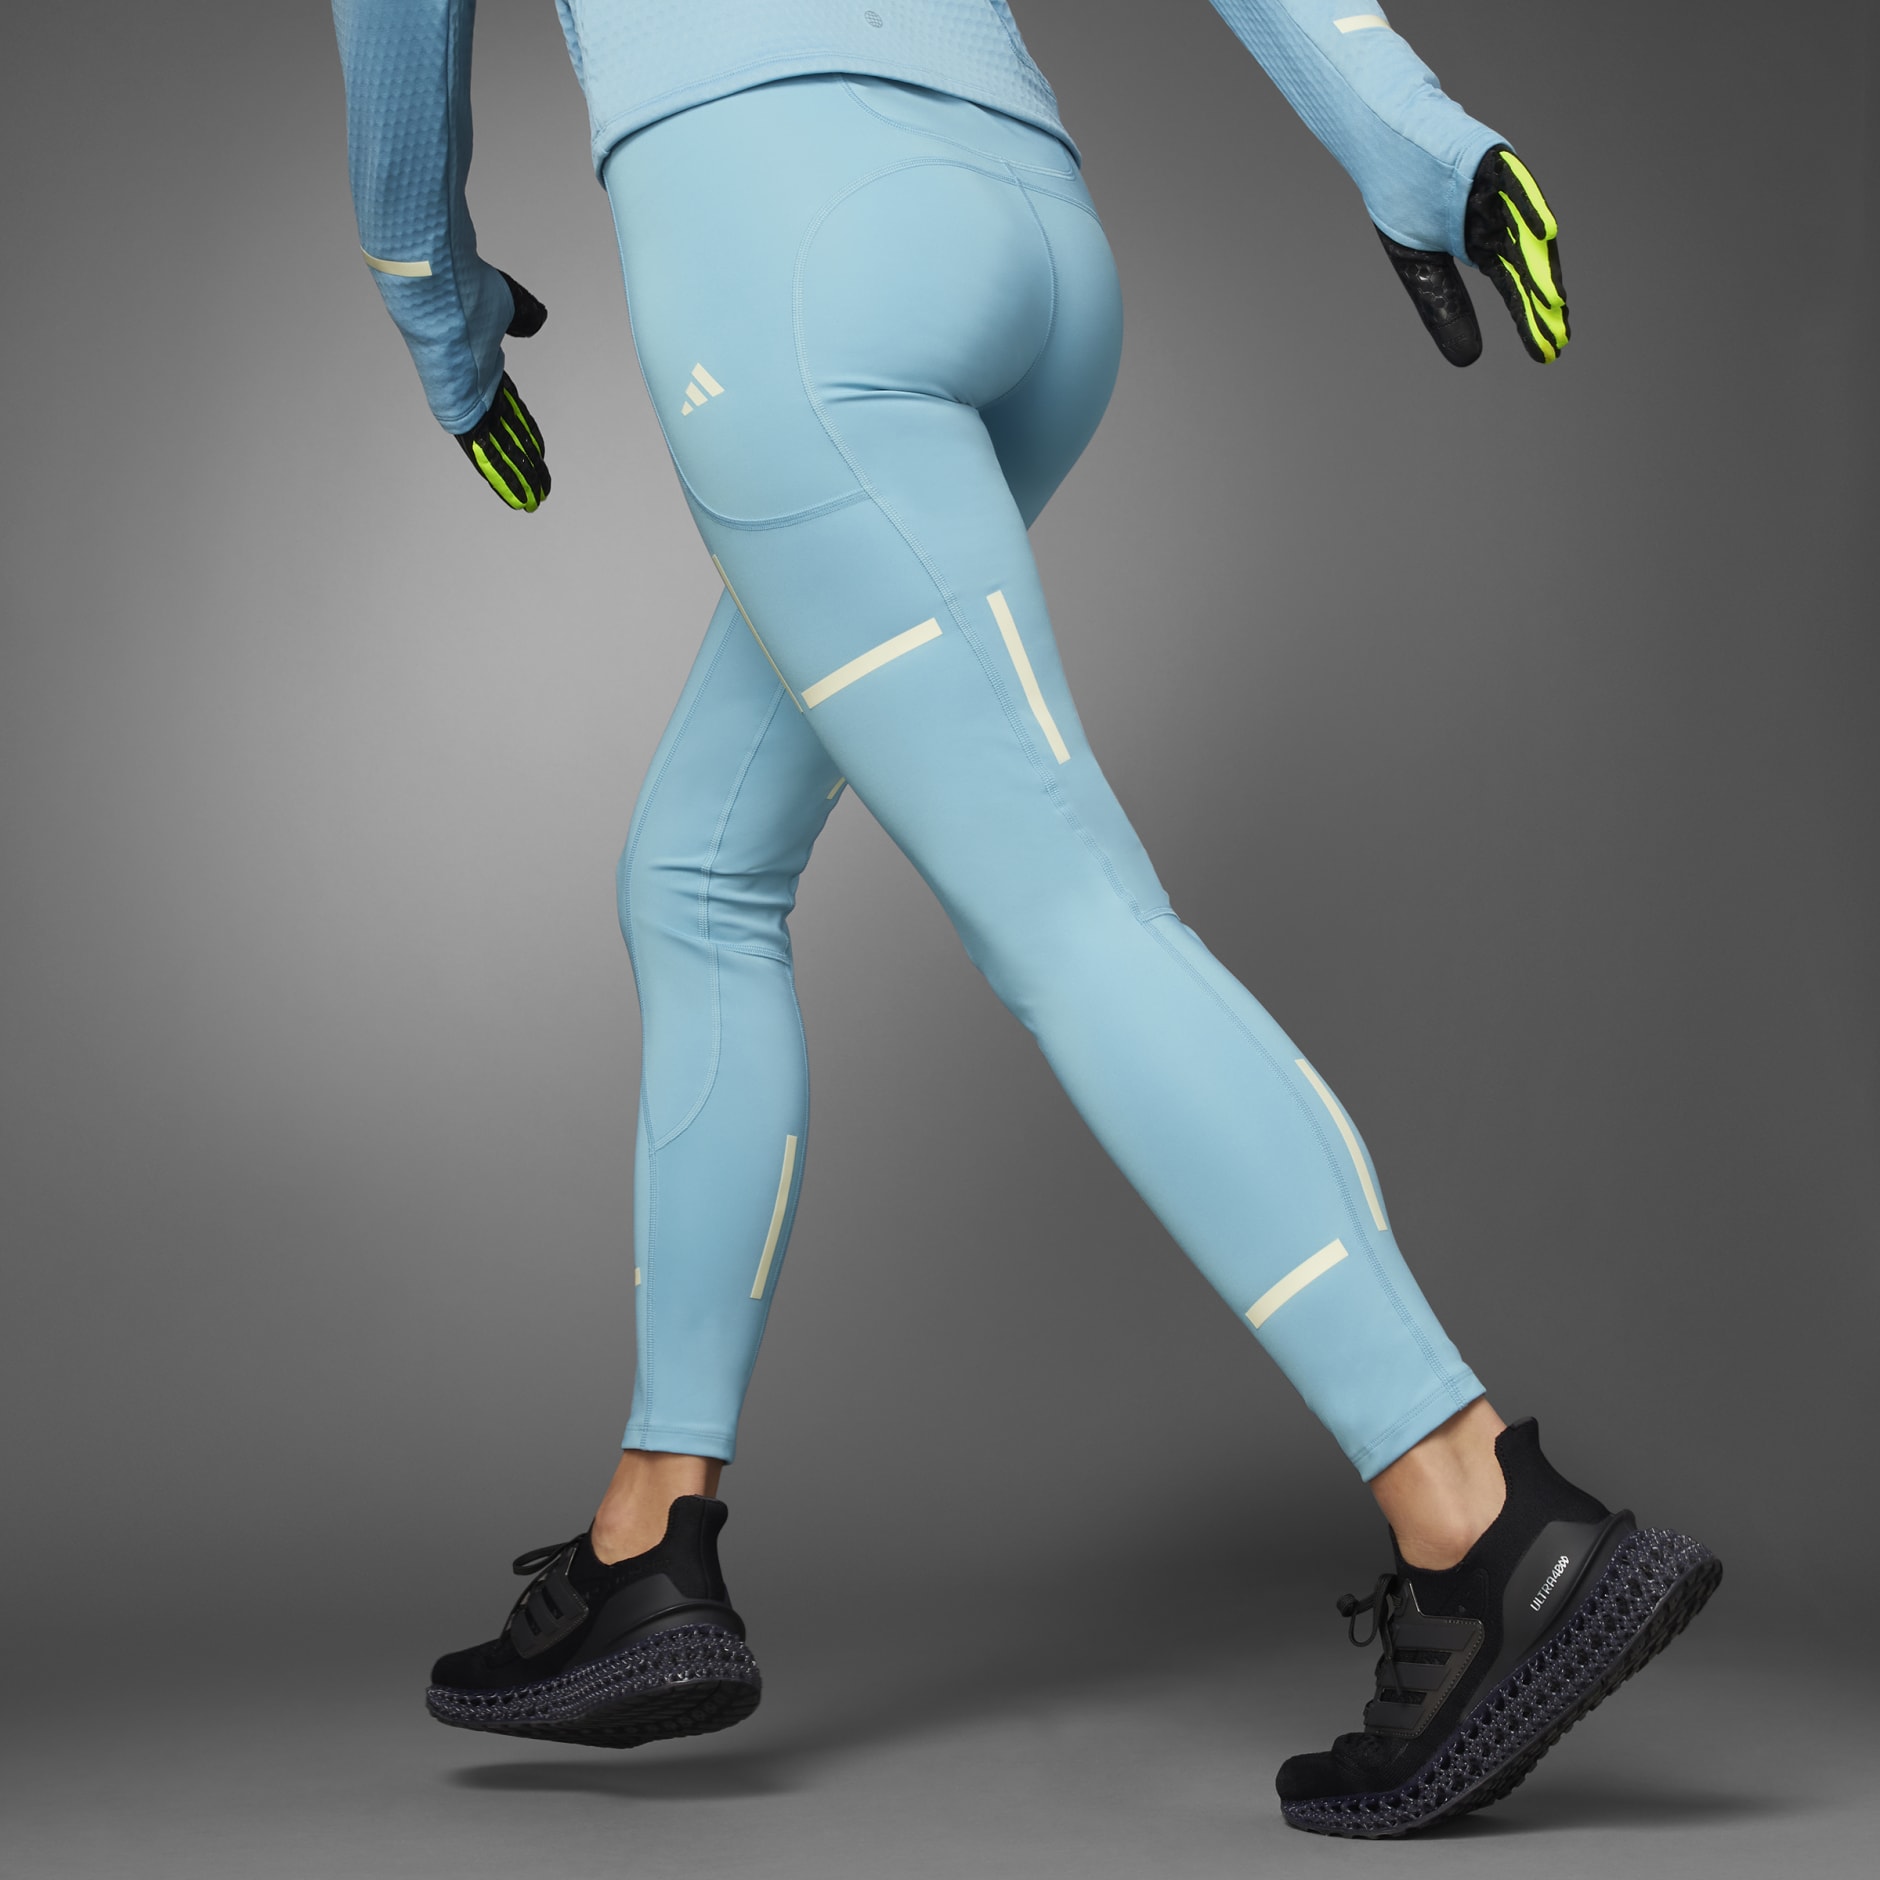 Nike Air Fast Mid-Rise Ankle Running Leggings with Pockets